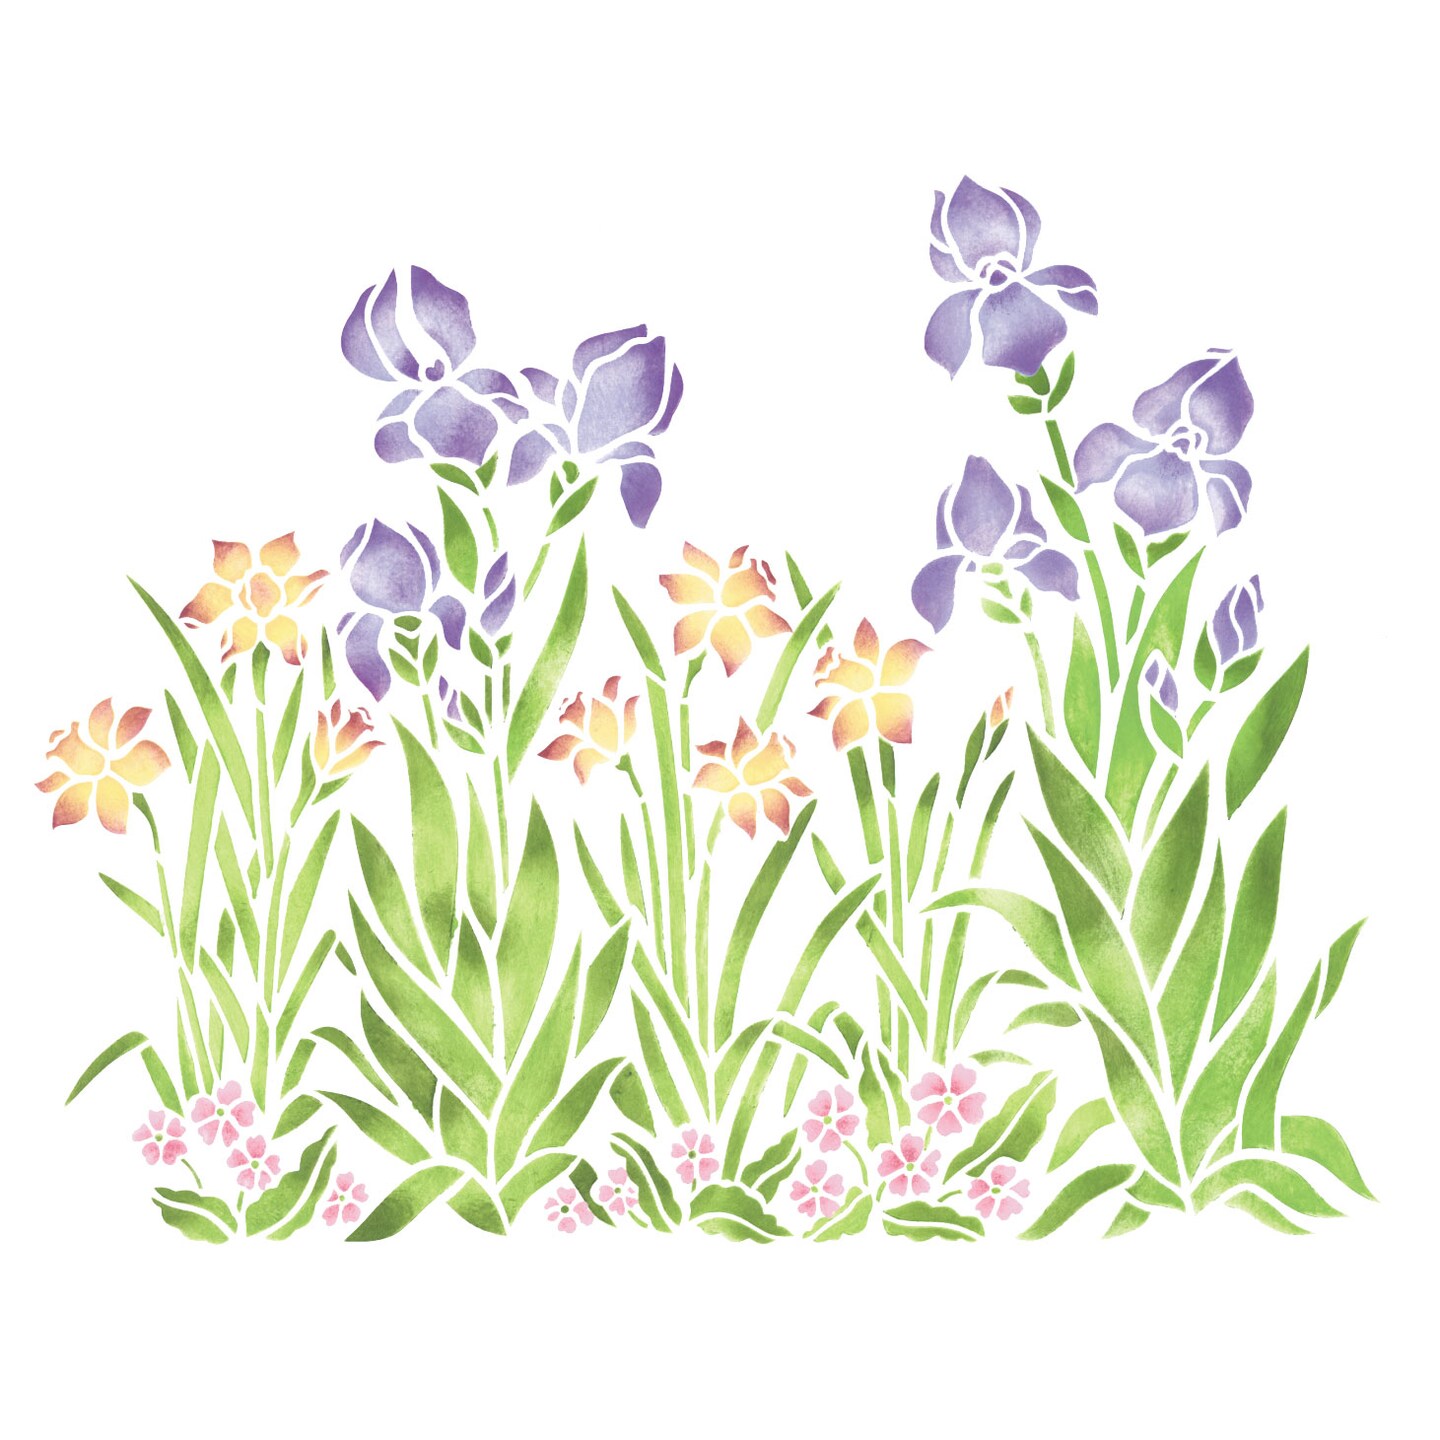 Large Iris, Daffodil and Violet Garden Wall Stencil | 156A by Designer Stencils | Floral Stencils | Reusable Art Craft Stencils for Painting on Walls, Canvas, Wood | Reusable Plastic Paint Stencil for Home Makeover | Easy to Use &#x26; Clean Art Stencil